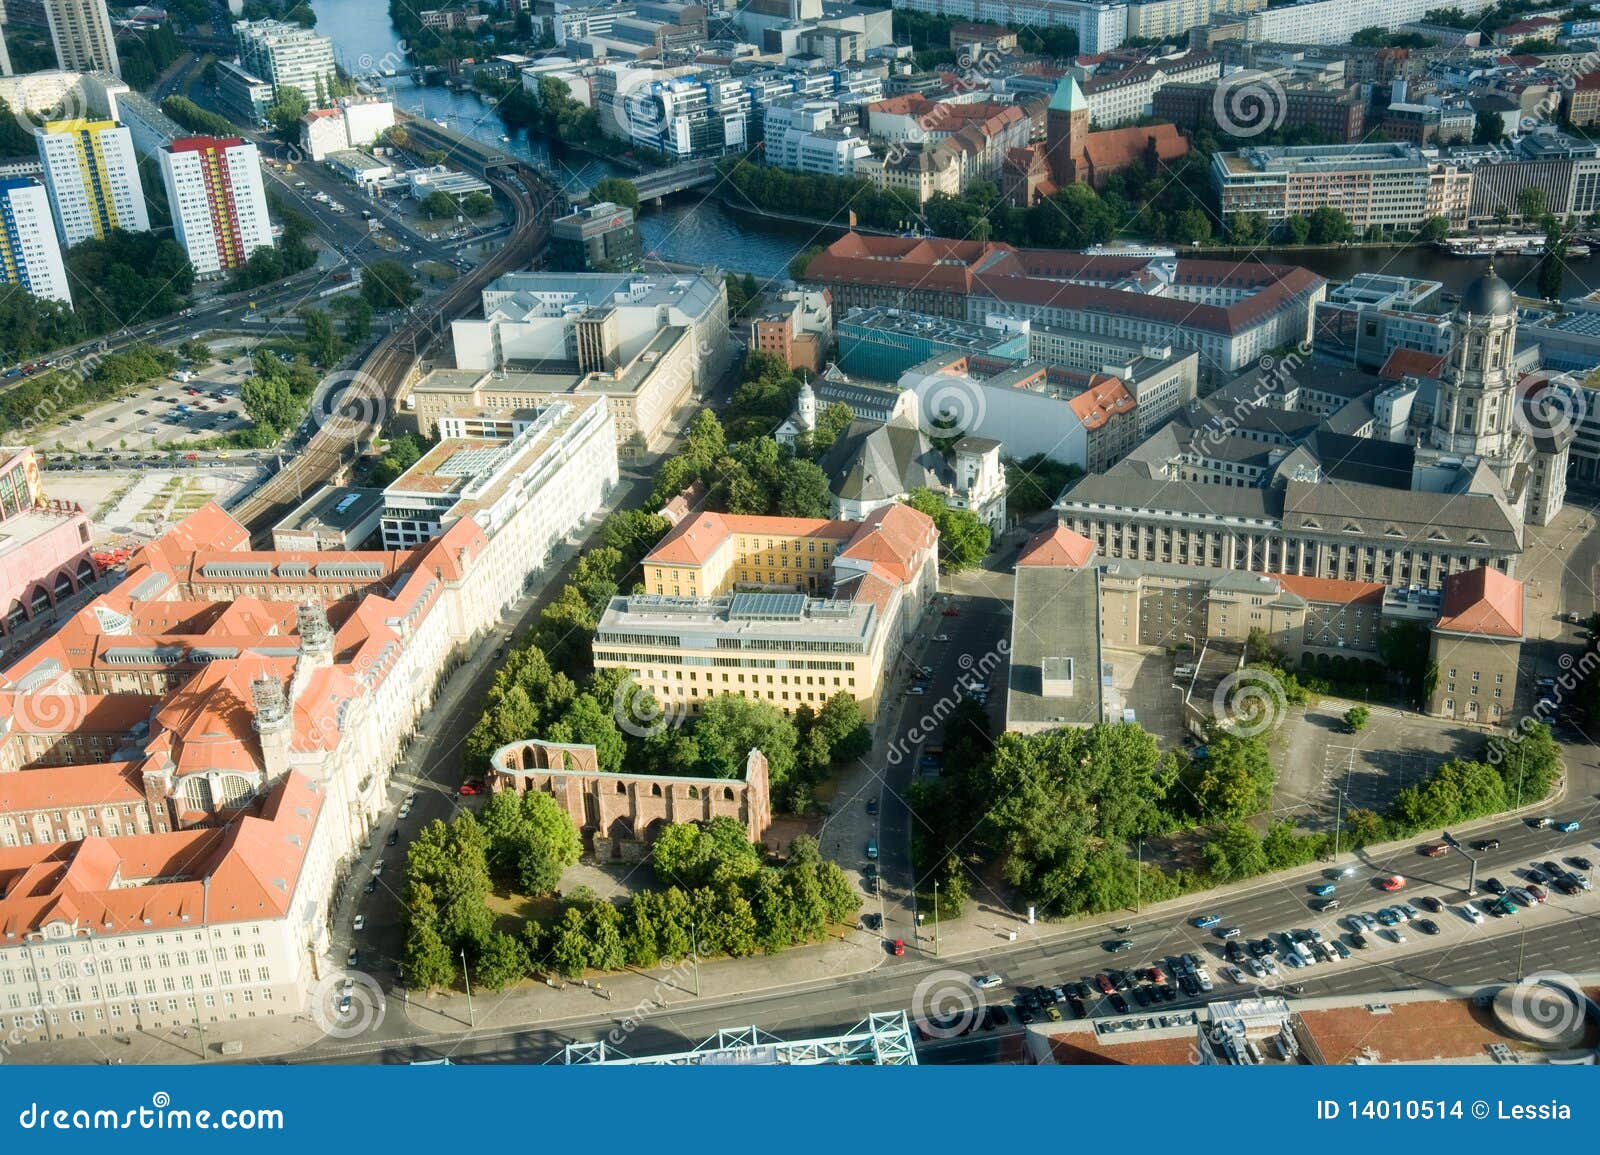 berlin areal view